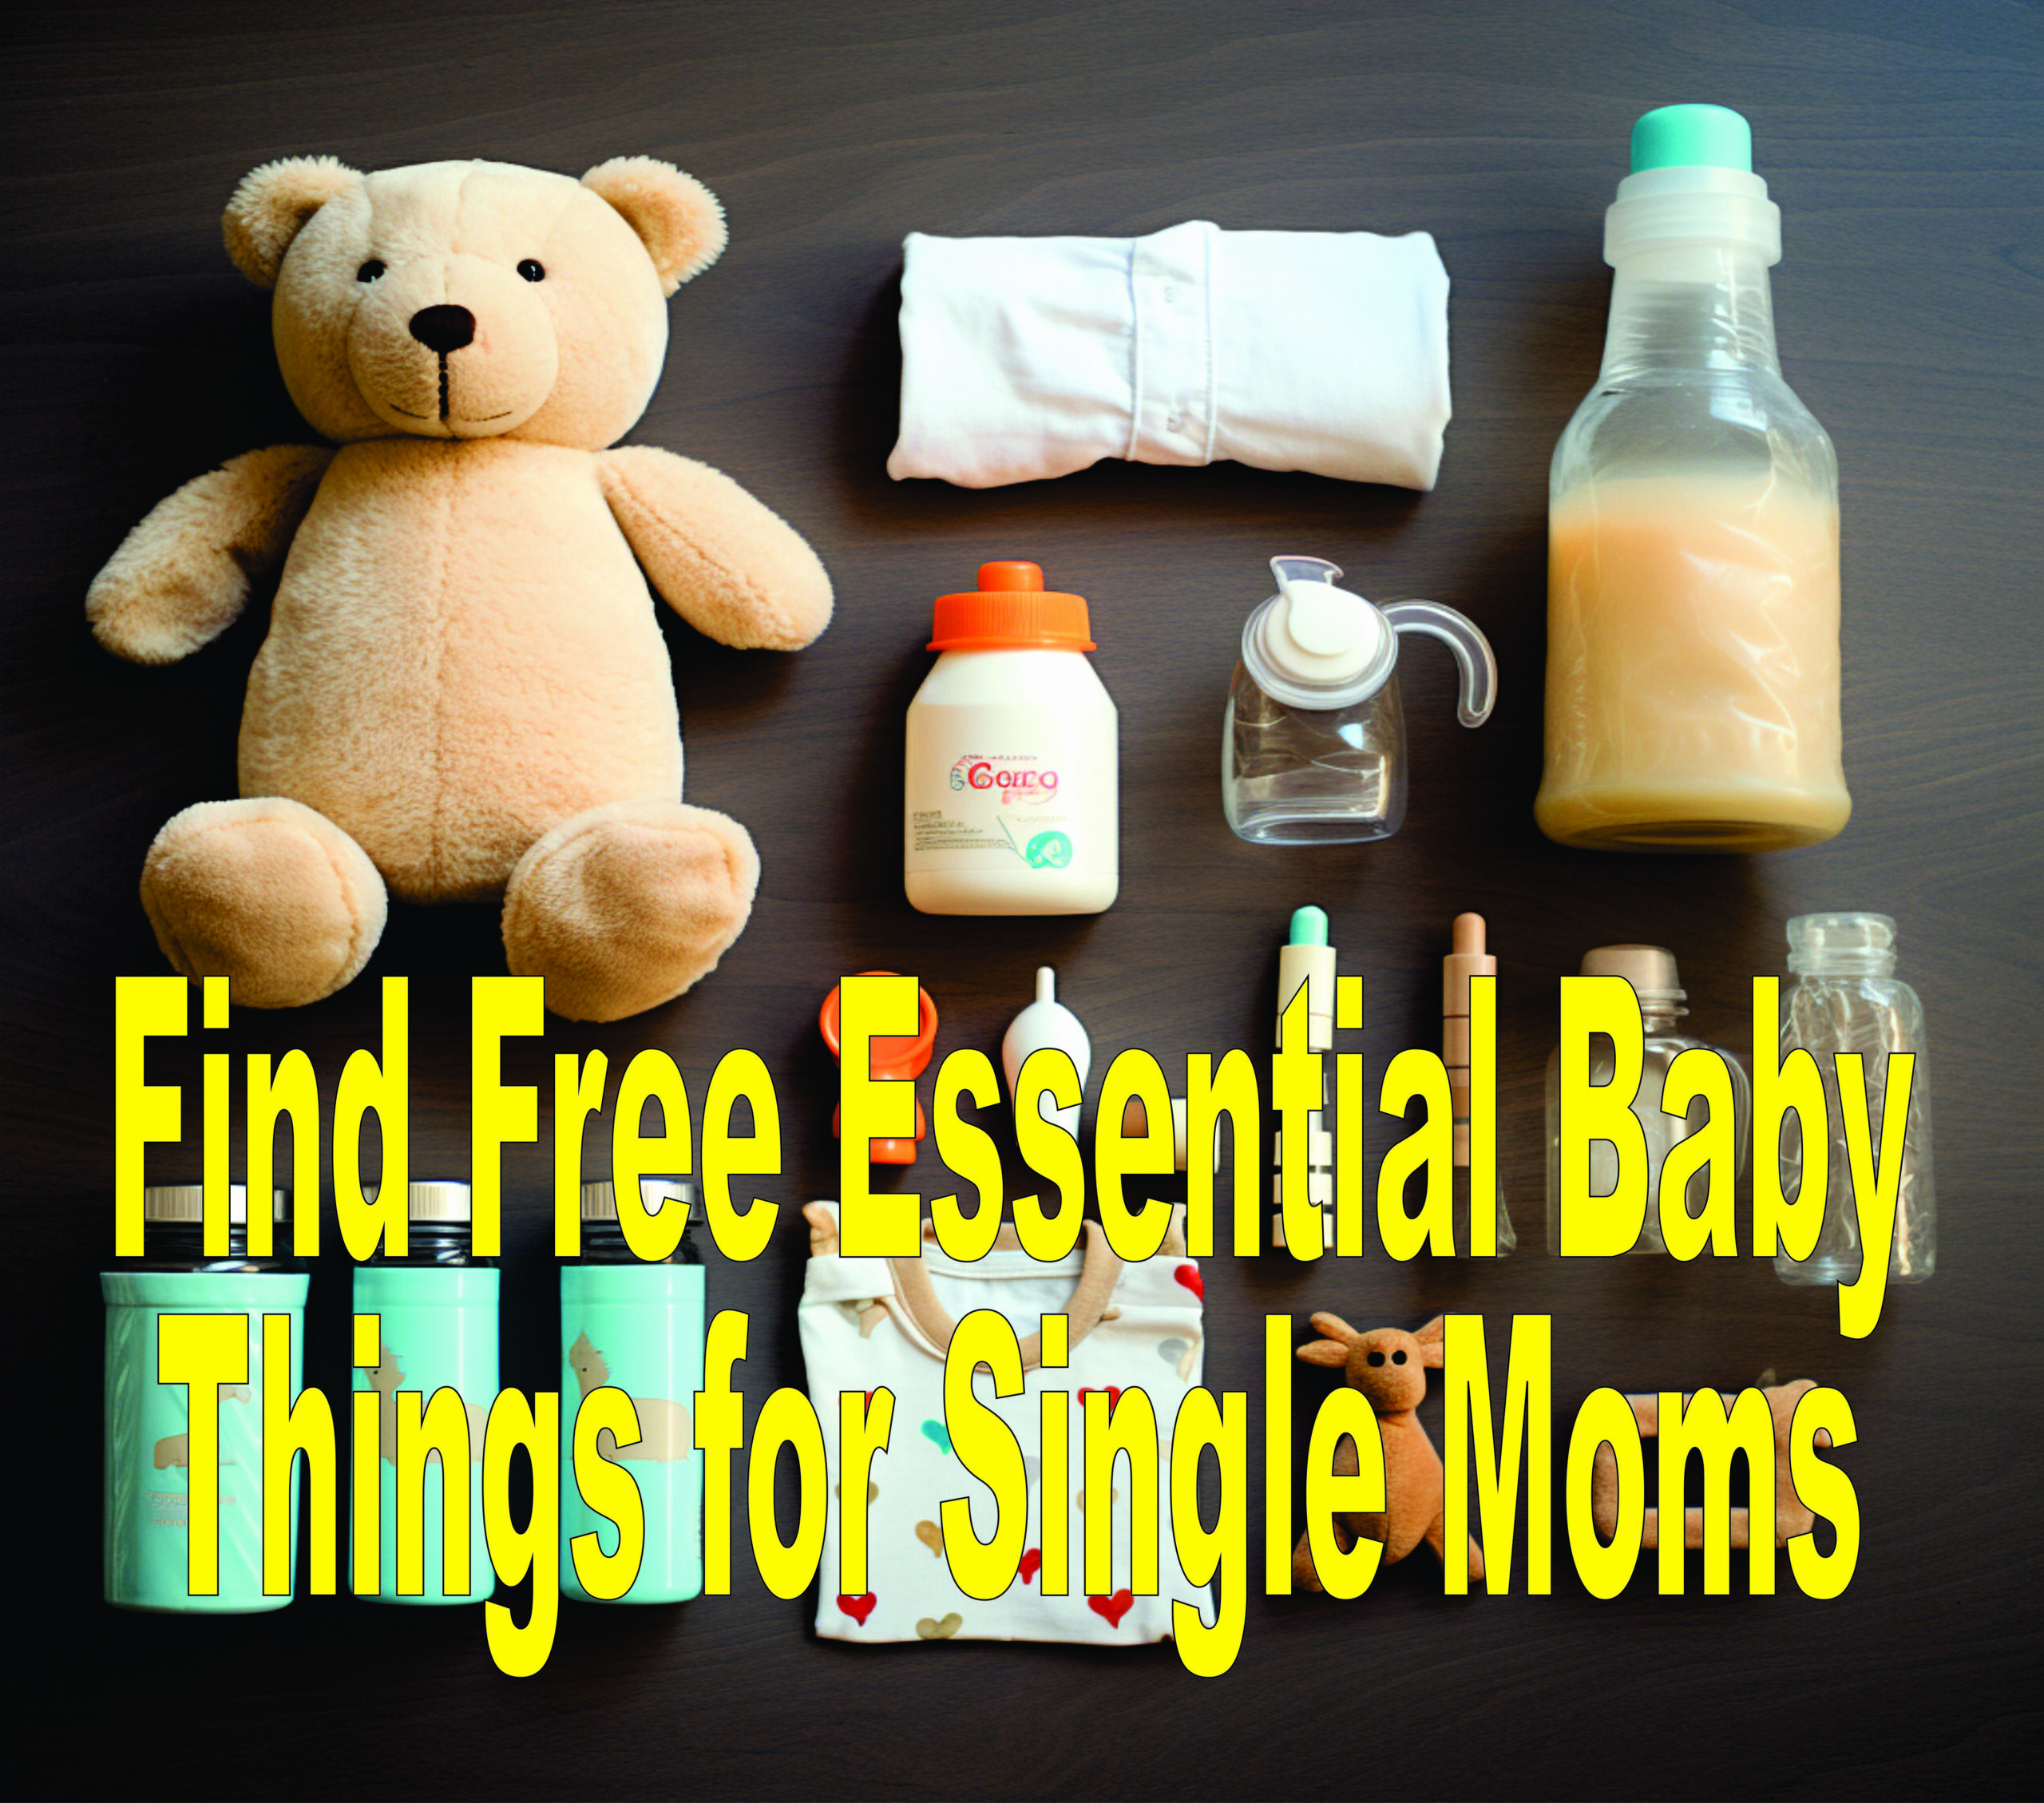 Find Free Essential Baby Things For Single Moms